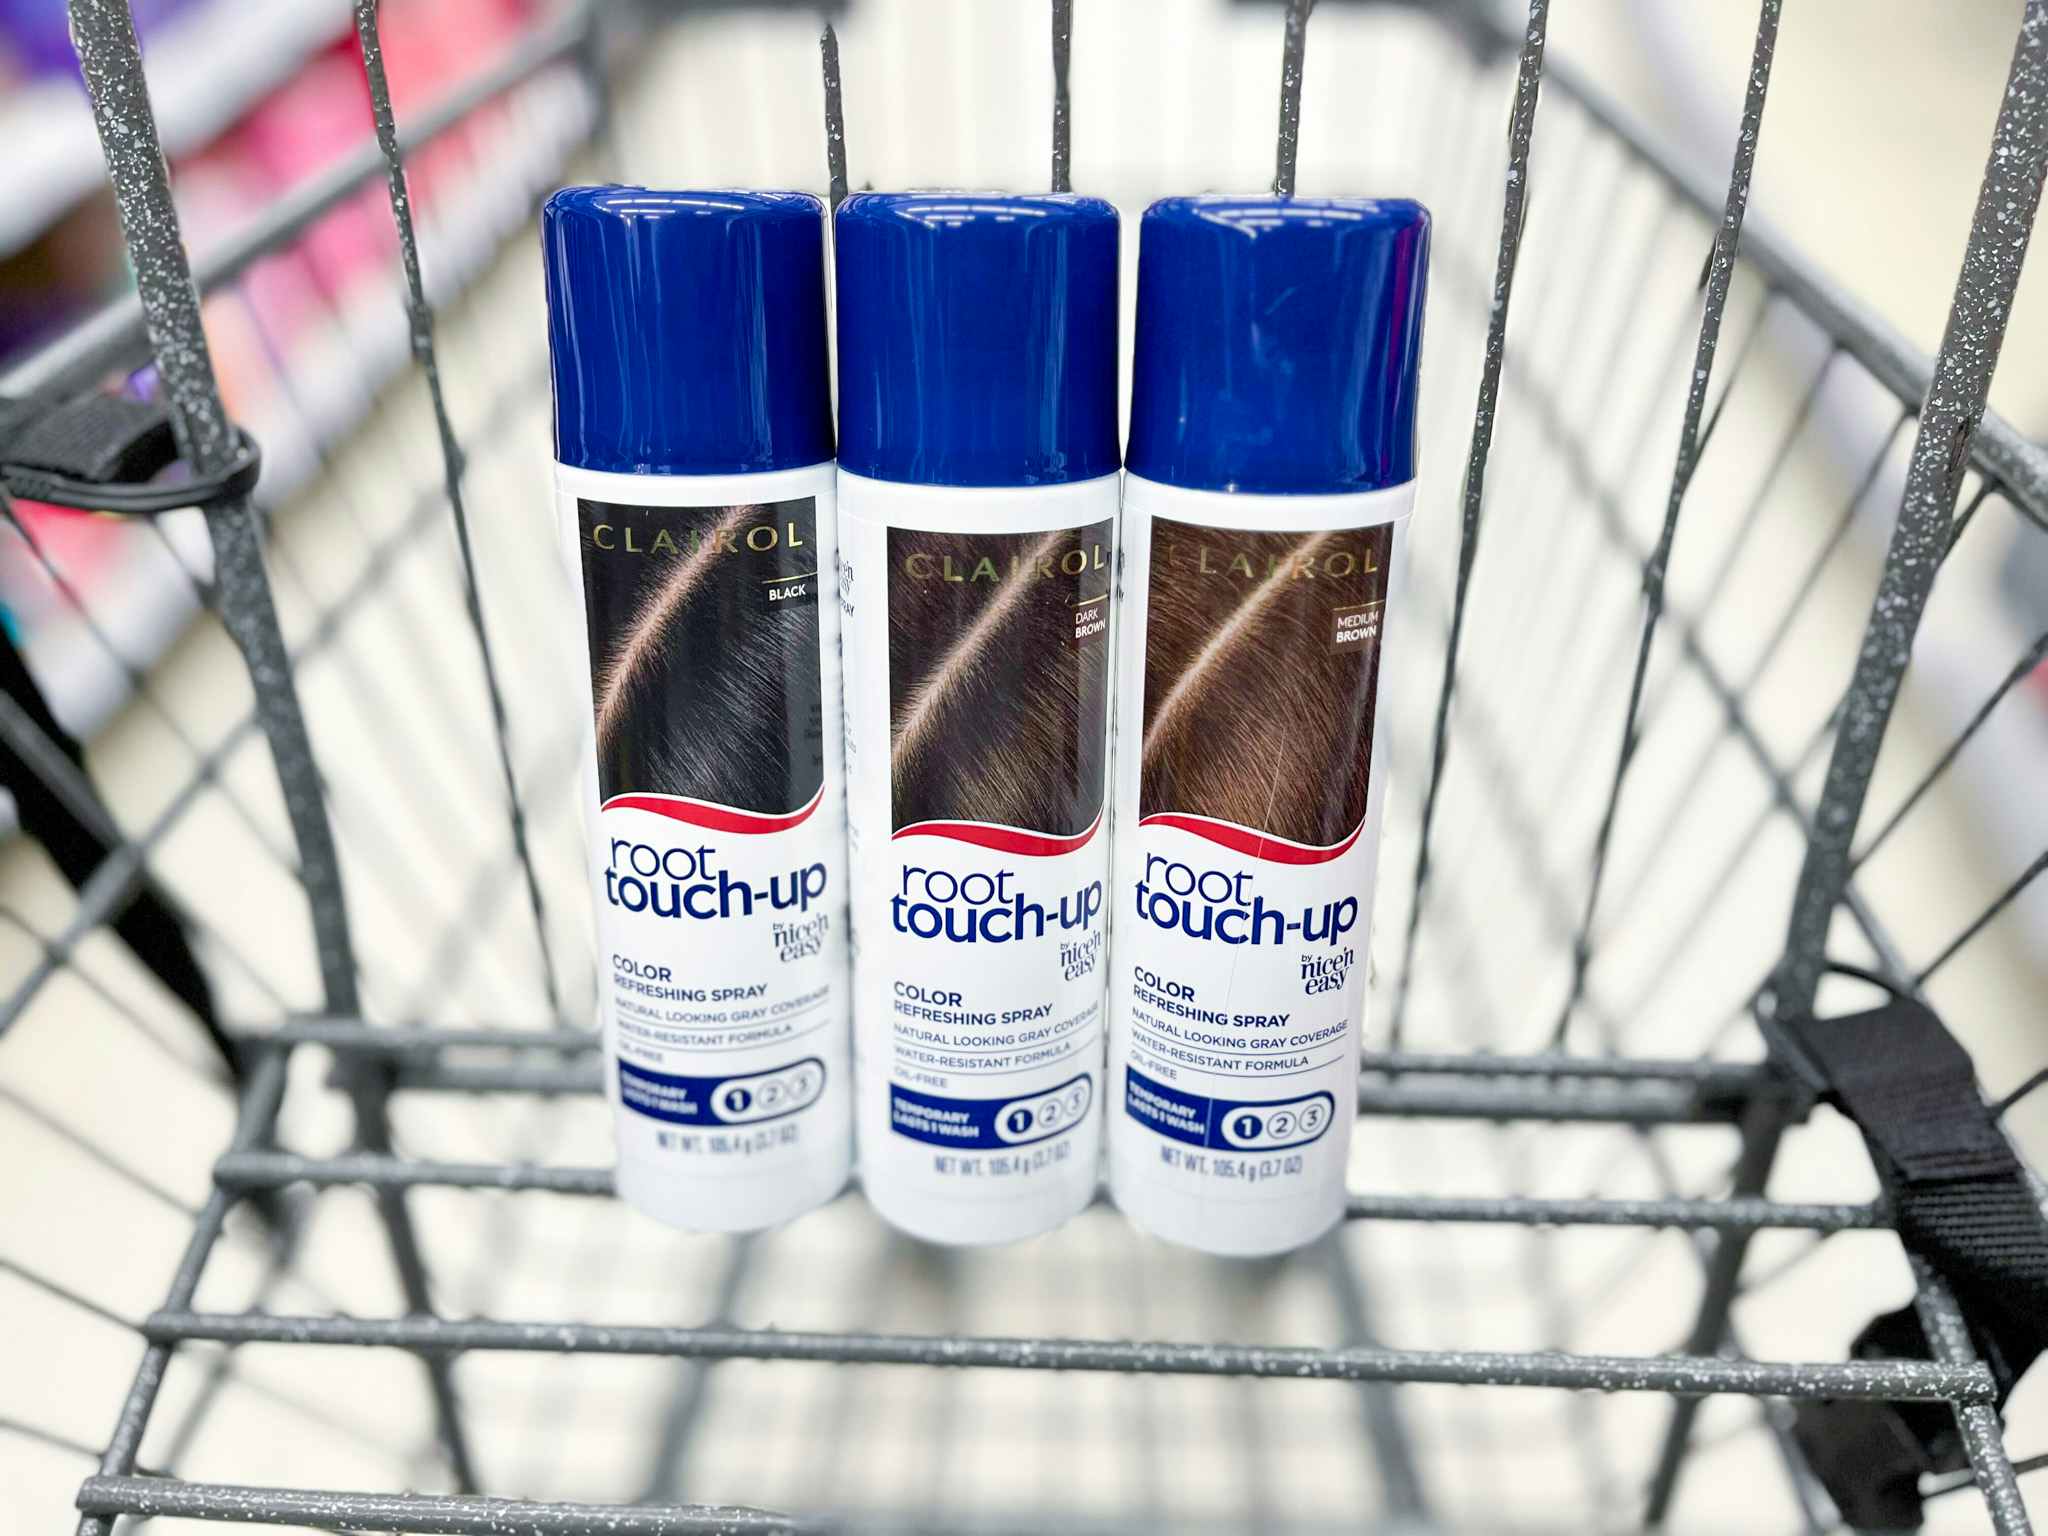 three cans of clairol hair color in basket